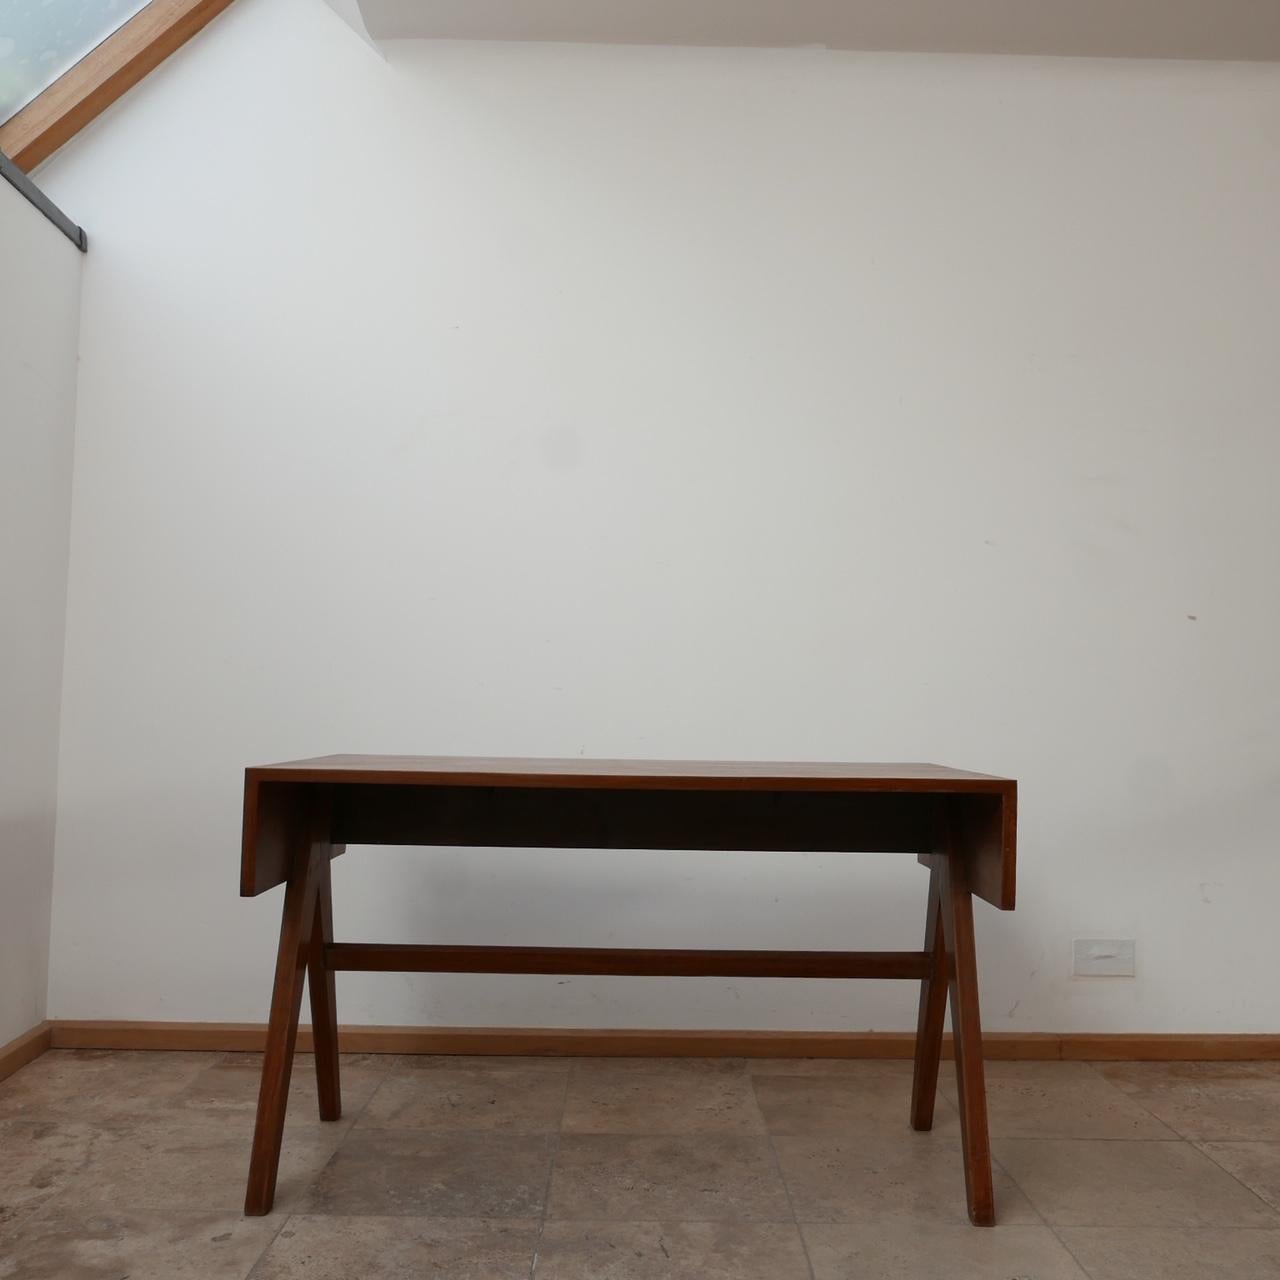 A scarce 'student' desk by Pierre Jeanneret. 

Formed from teak. 

India, c1960s. 

Compass style legs, the desk remains in good vintage condition. 

Location: London Gallery. 

Dimensions: 122 W x 61 D x 771.5 H in cm.

Delivery: